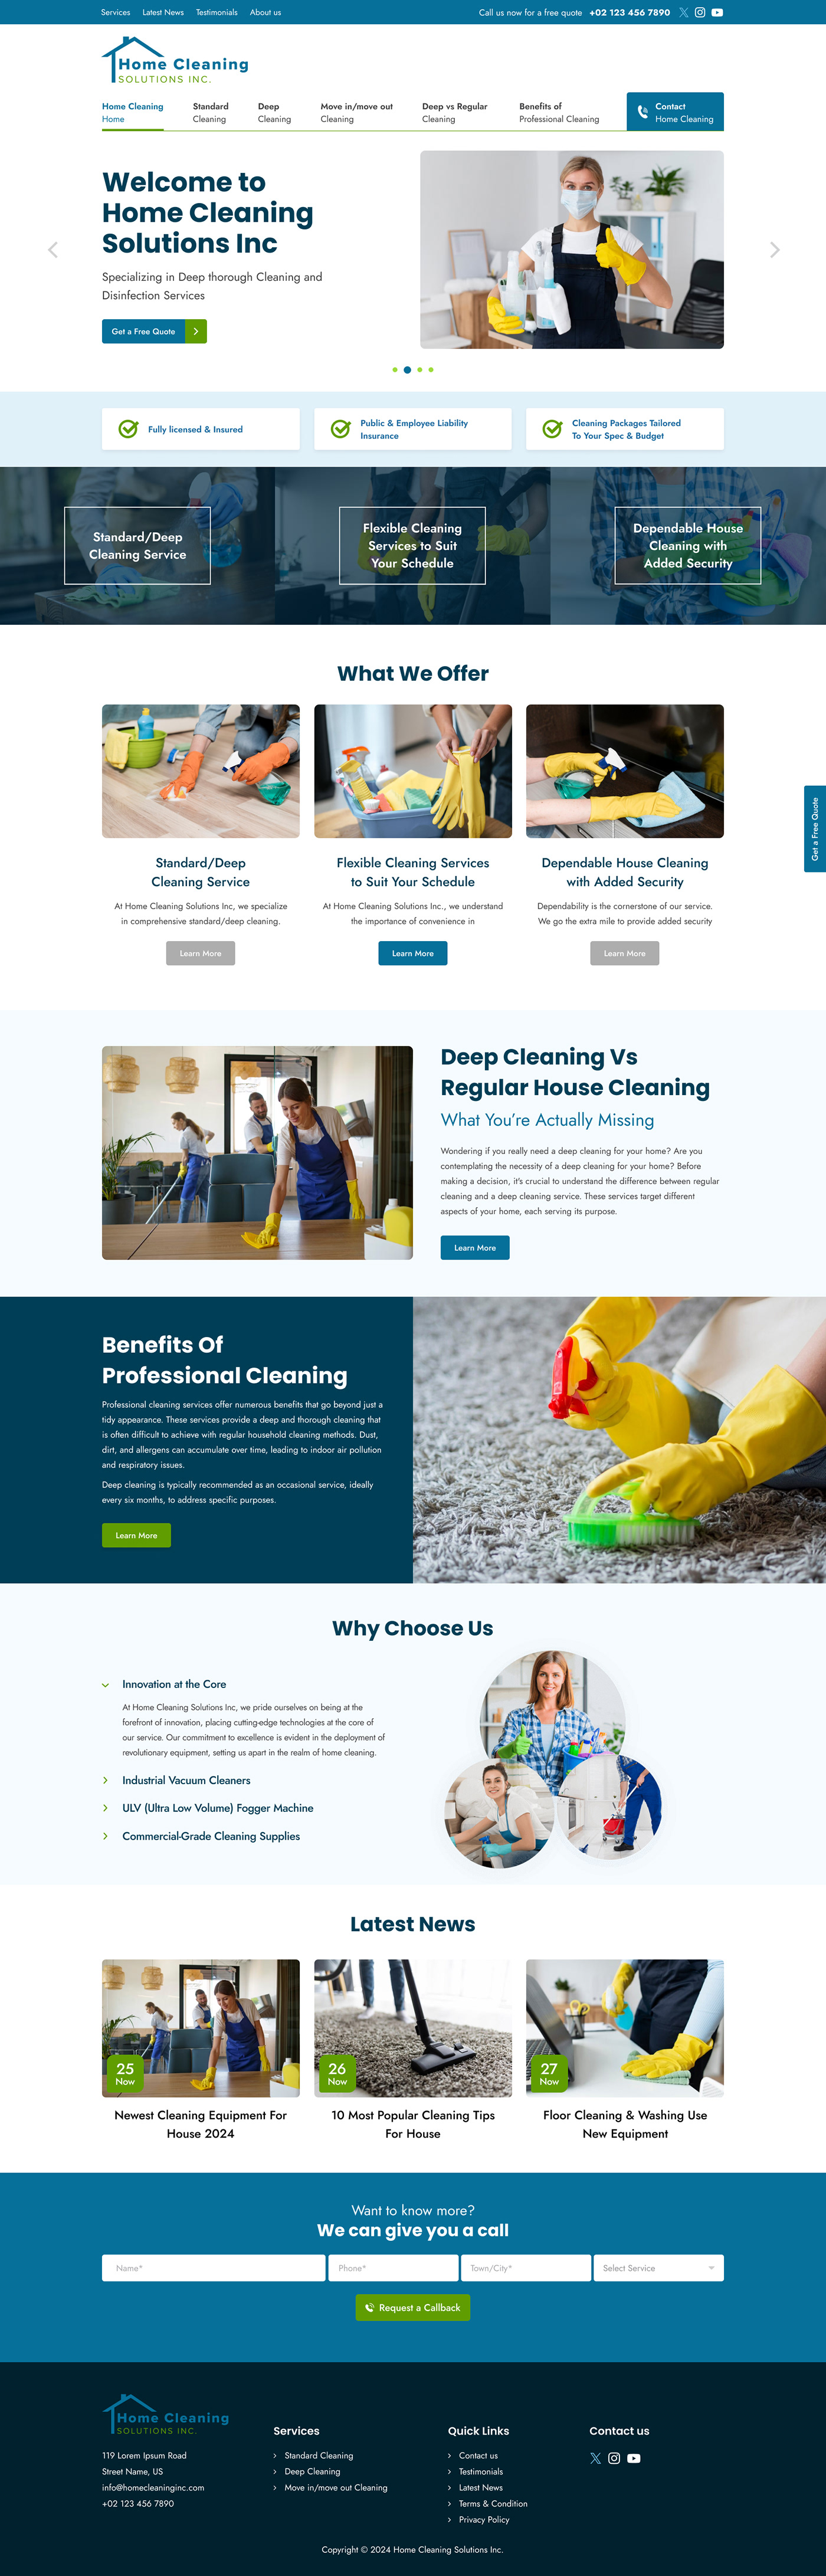 cleaning service cleaning website Website Landing Page company landing page cleaning company cleaning landing page cleaning service website cleaning services Cleaning Services Website house cleaning